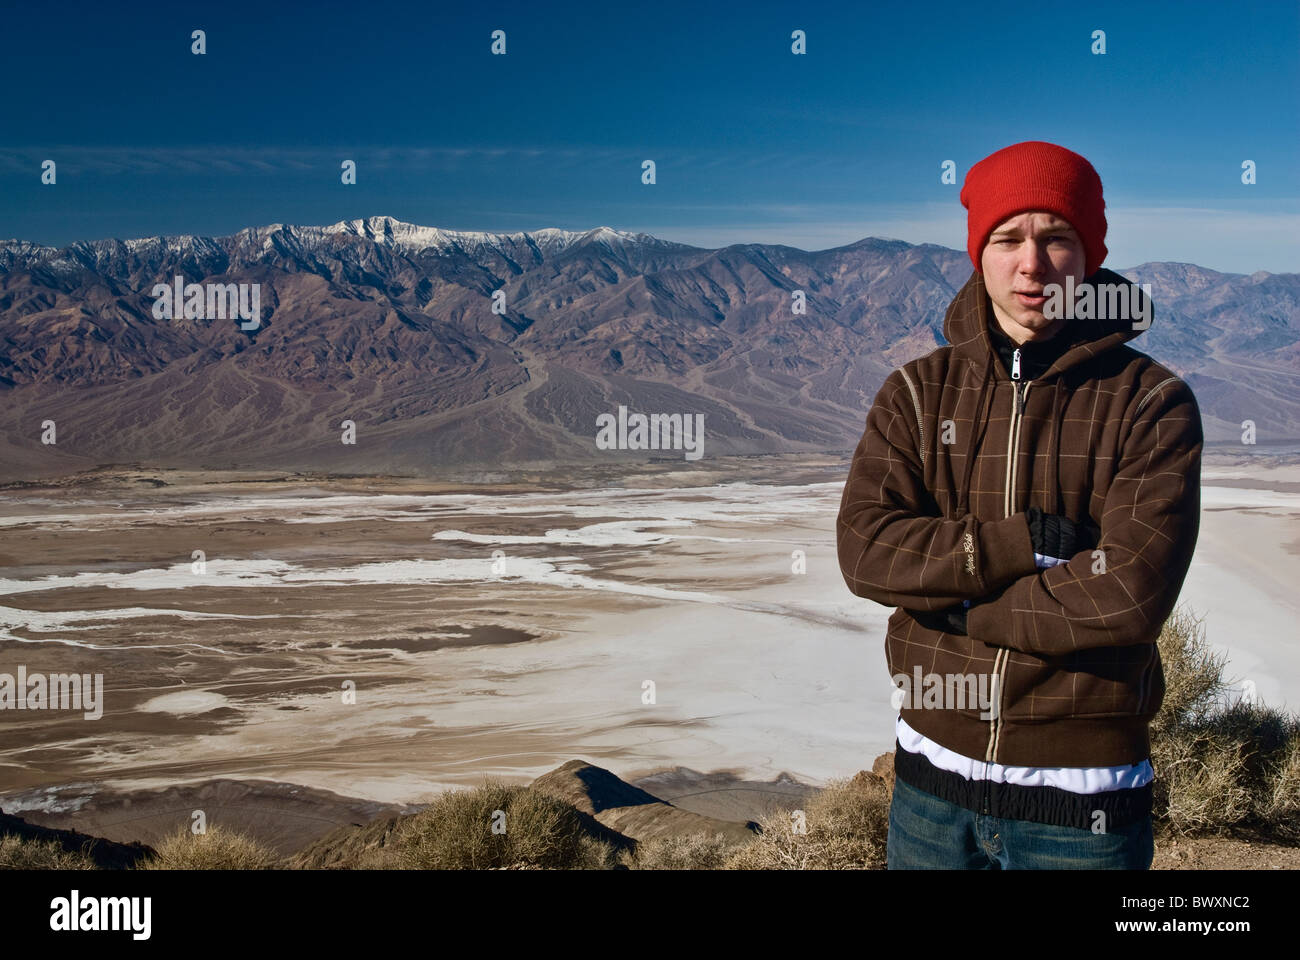 Teenager hiker at Dante's View, winter, Death Valley, California, USA Stock Photo